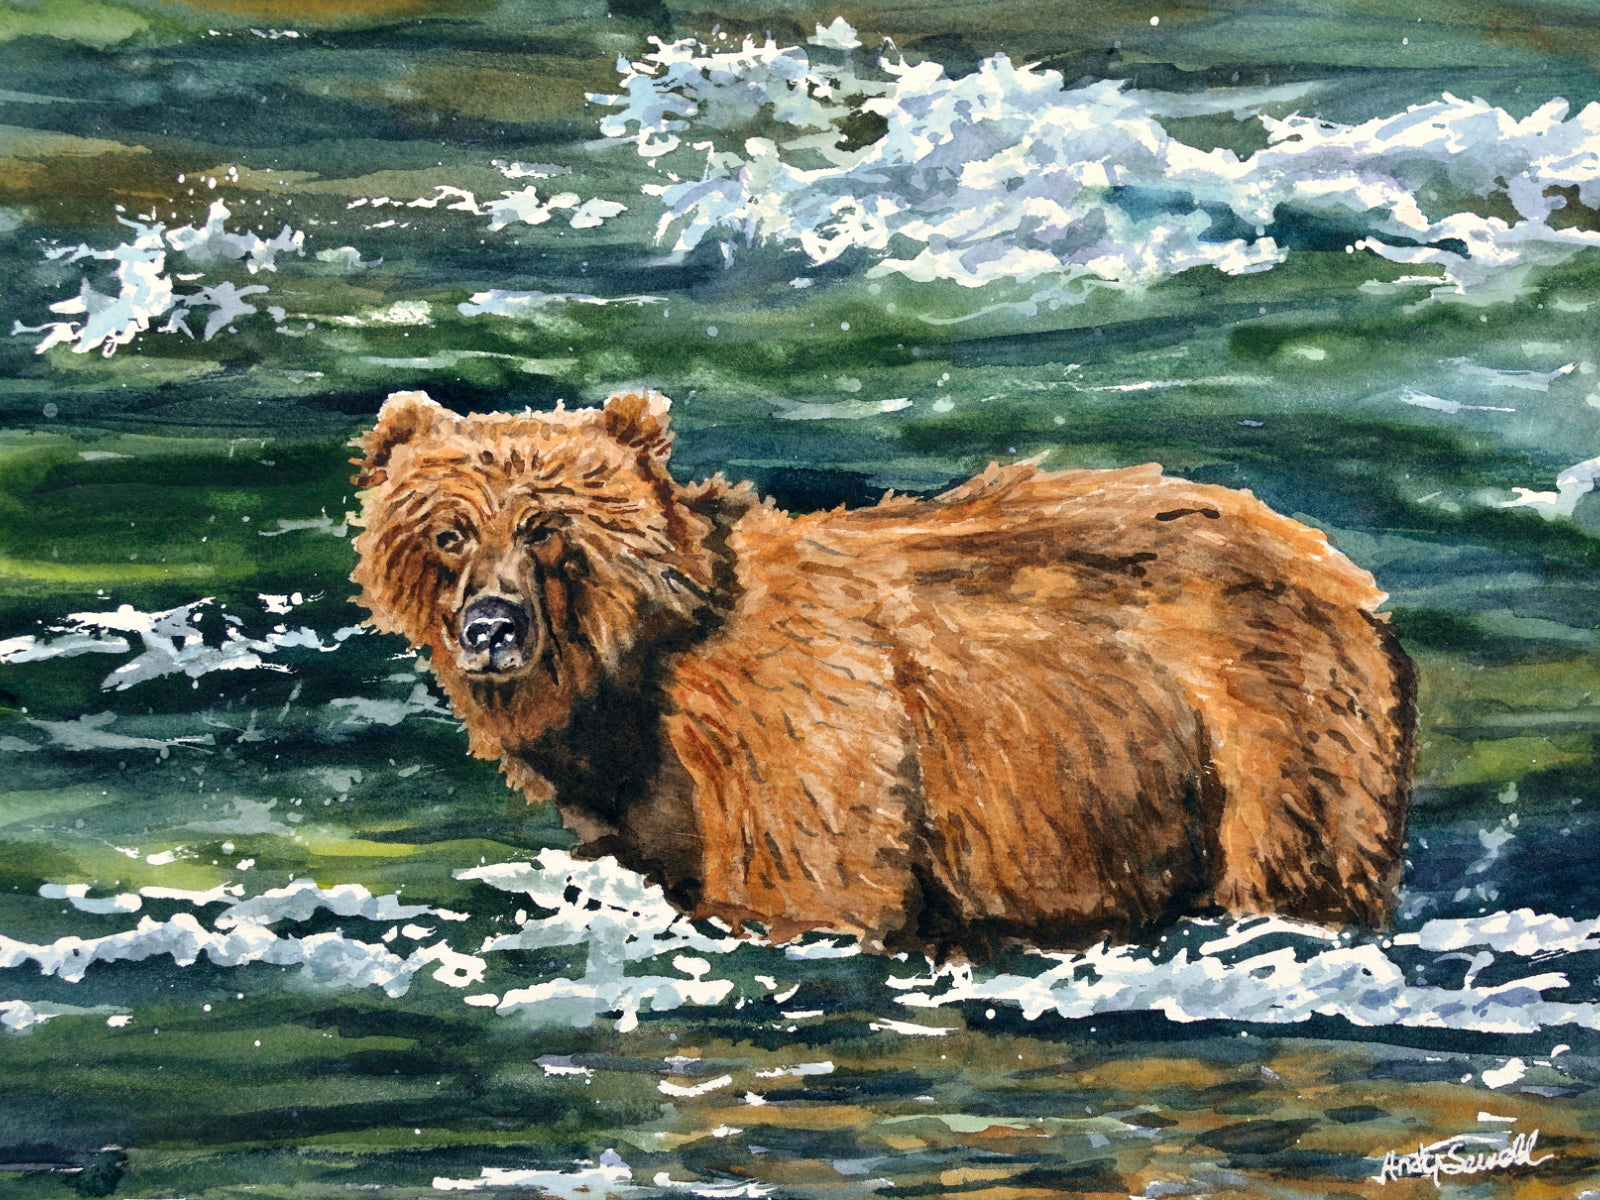 Grizzly Fishing - 11x15 Original watercolor or Giclée print.